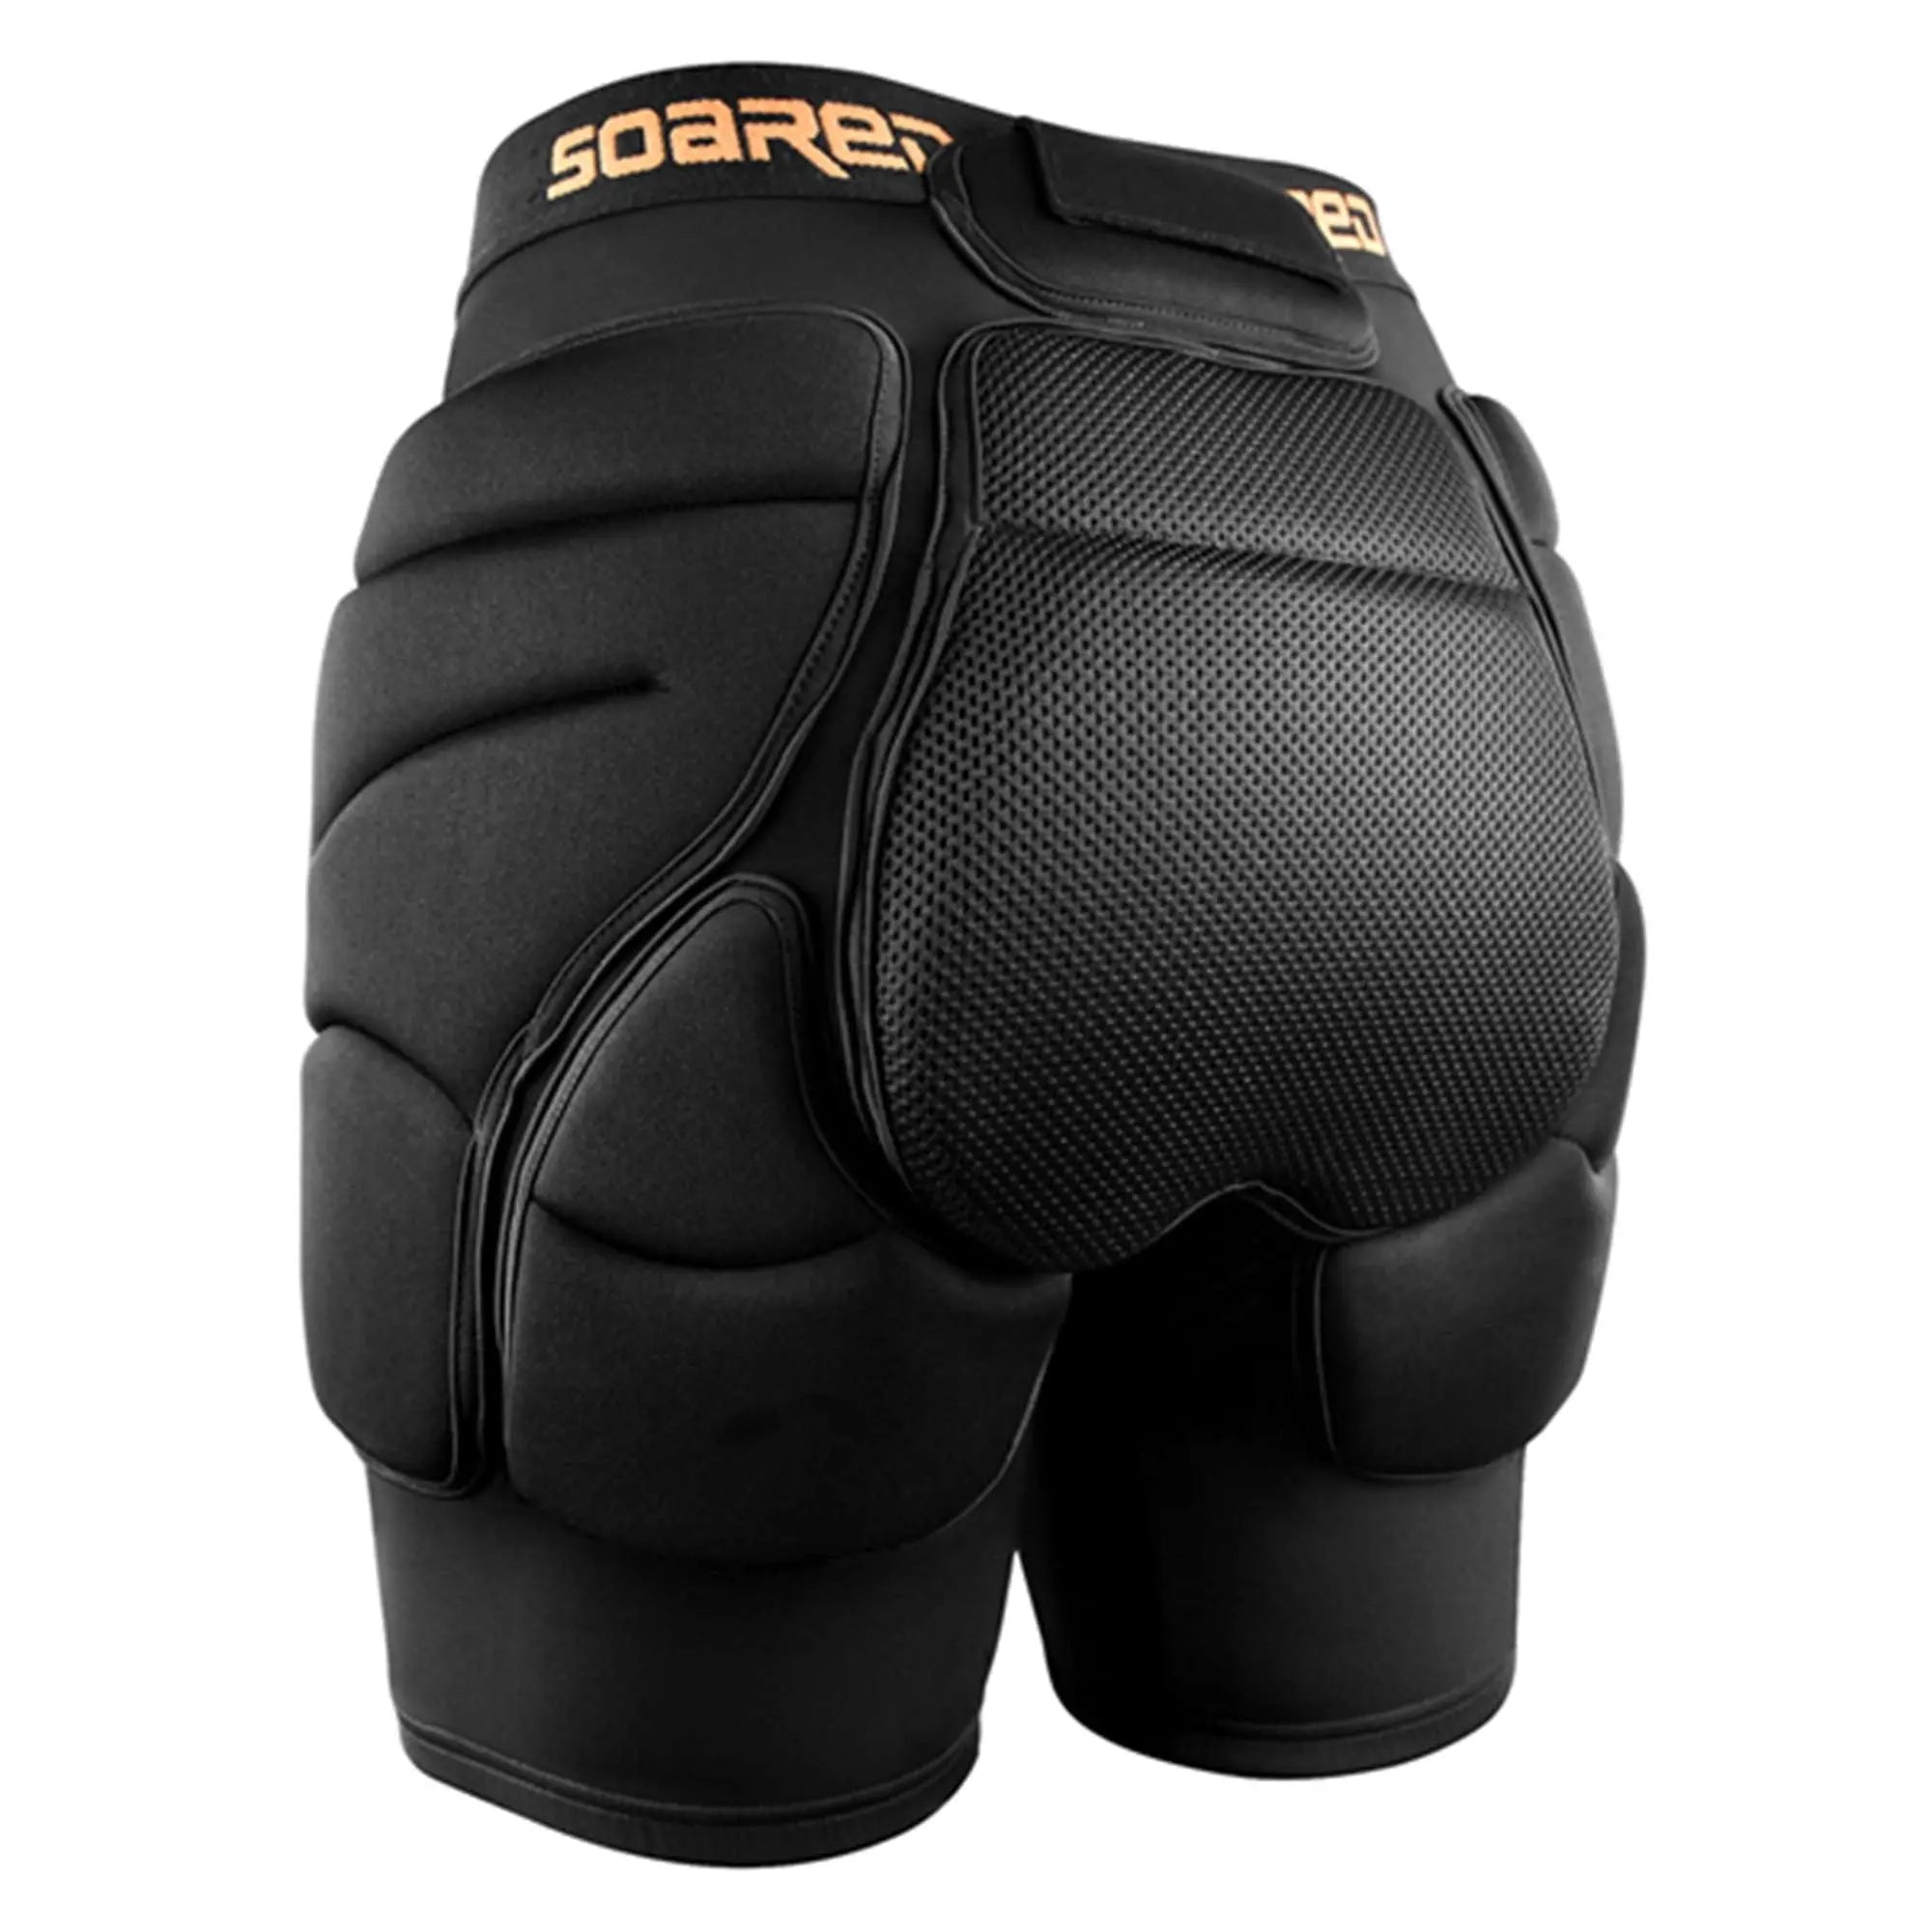 Padded Shorts for Men, Butt Pads for Skating, Padded Compression